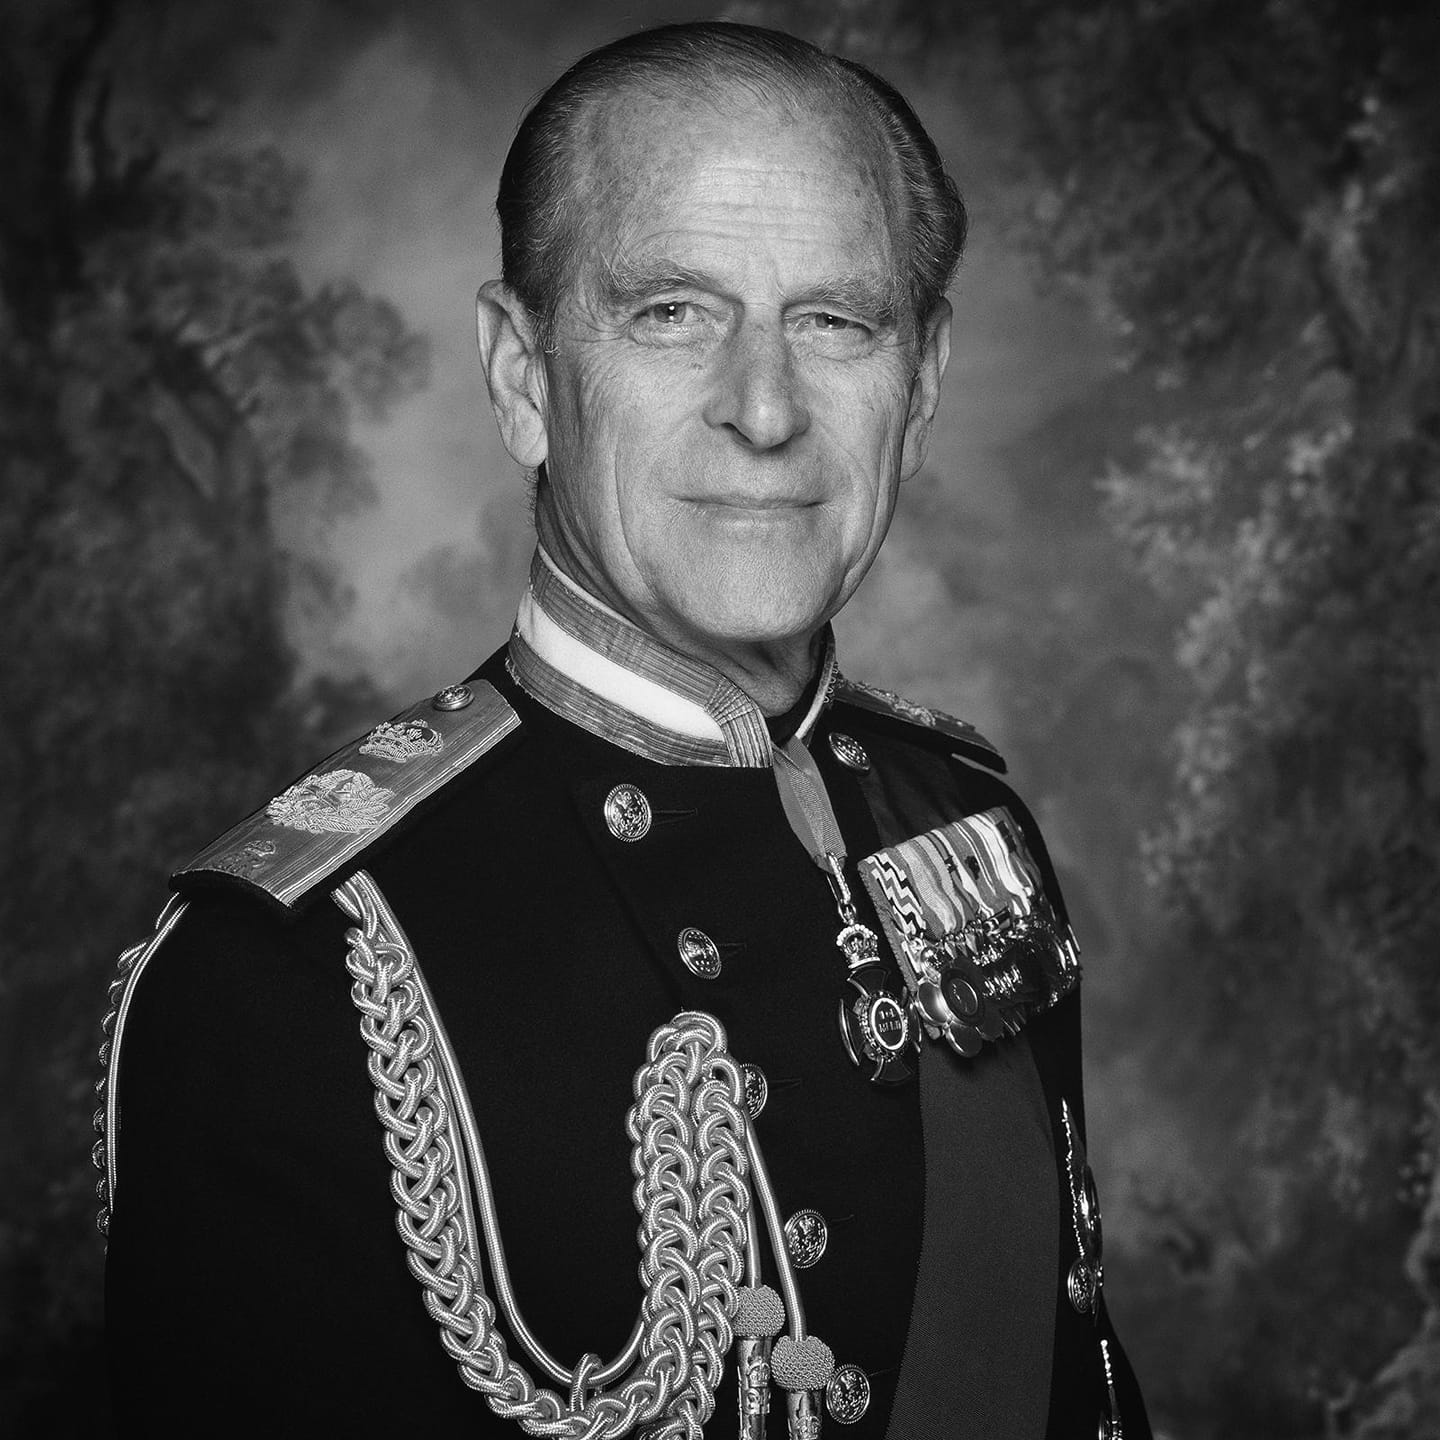 Announcing the death of His Royal Highness Prince Phillip